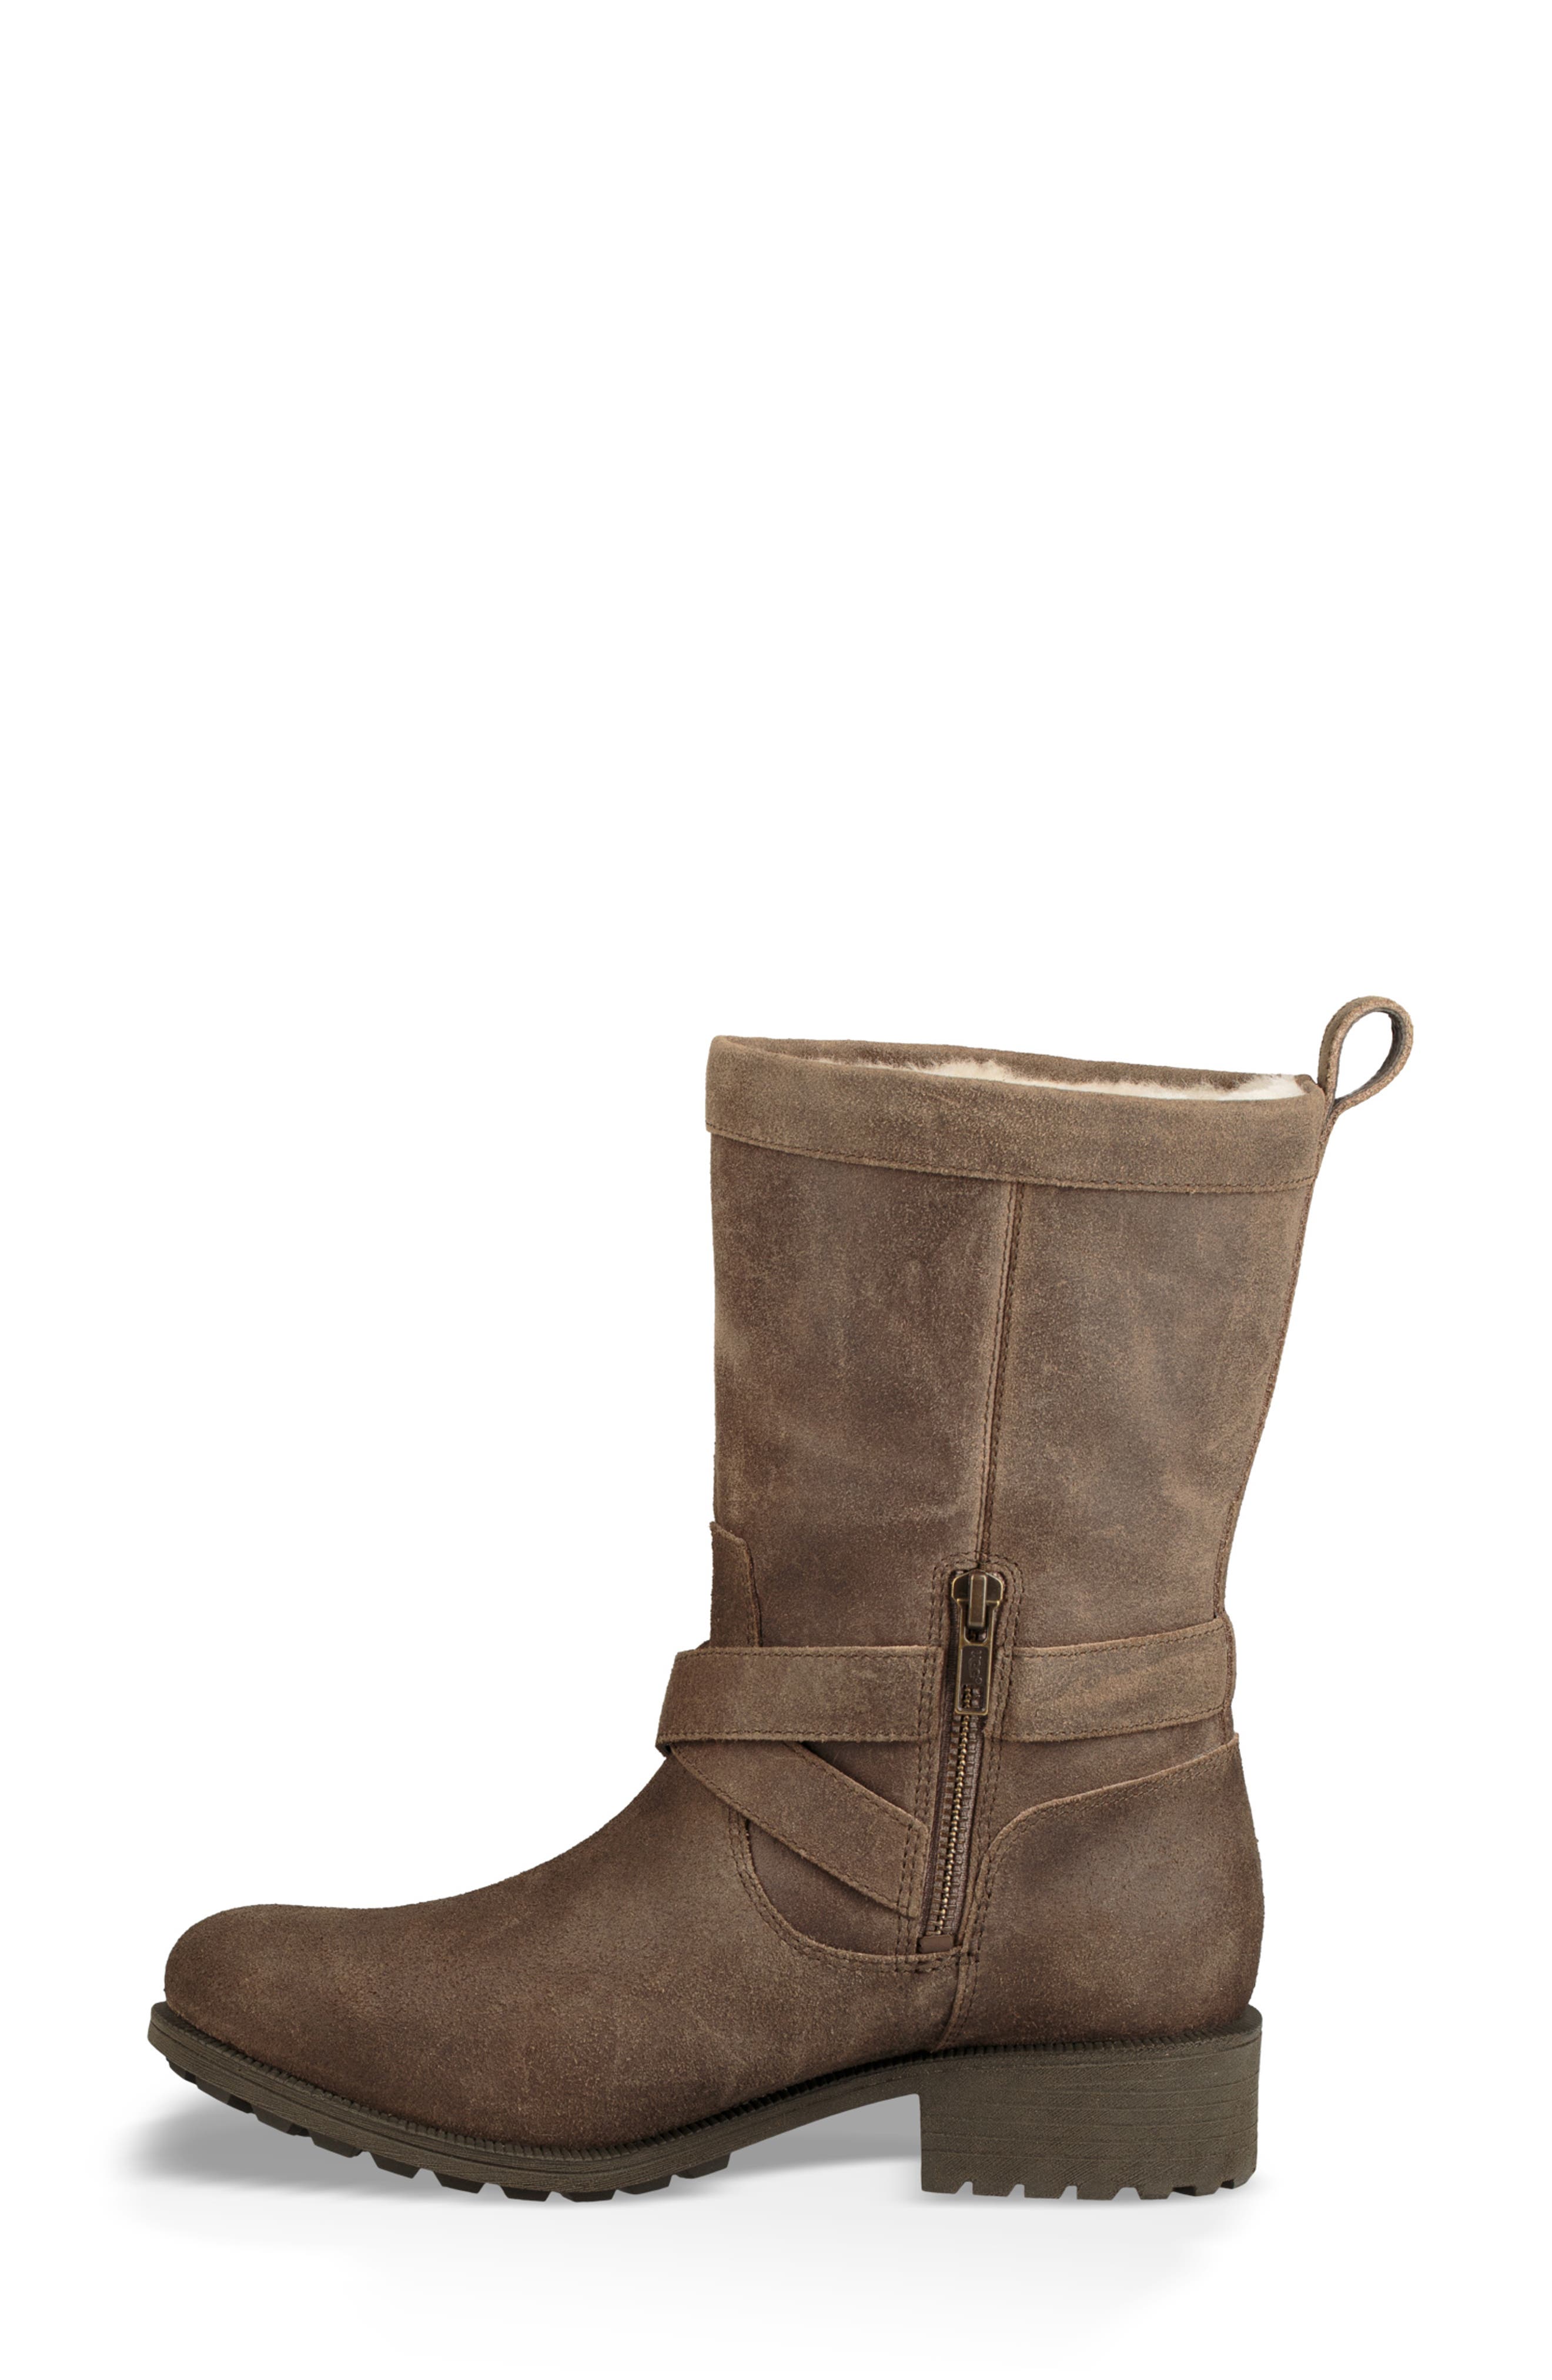 glendale water resistant boot